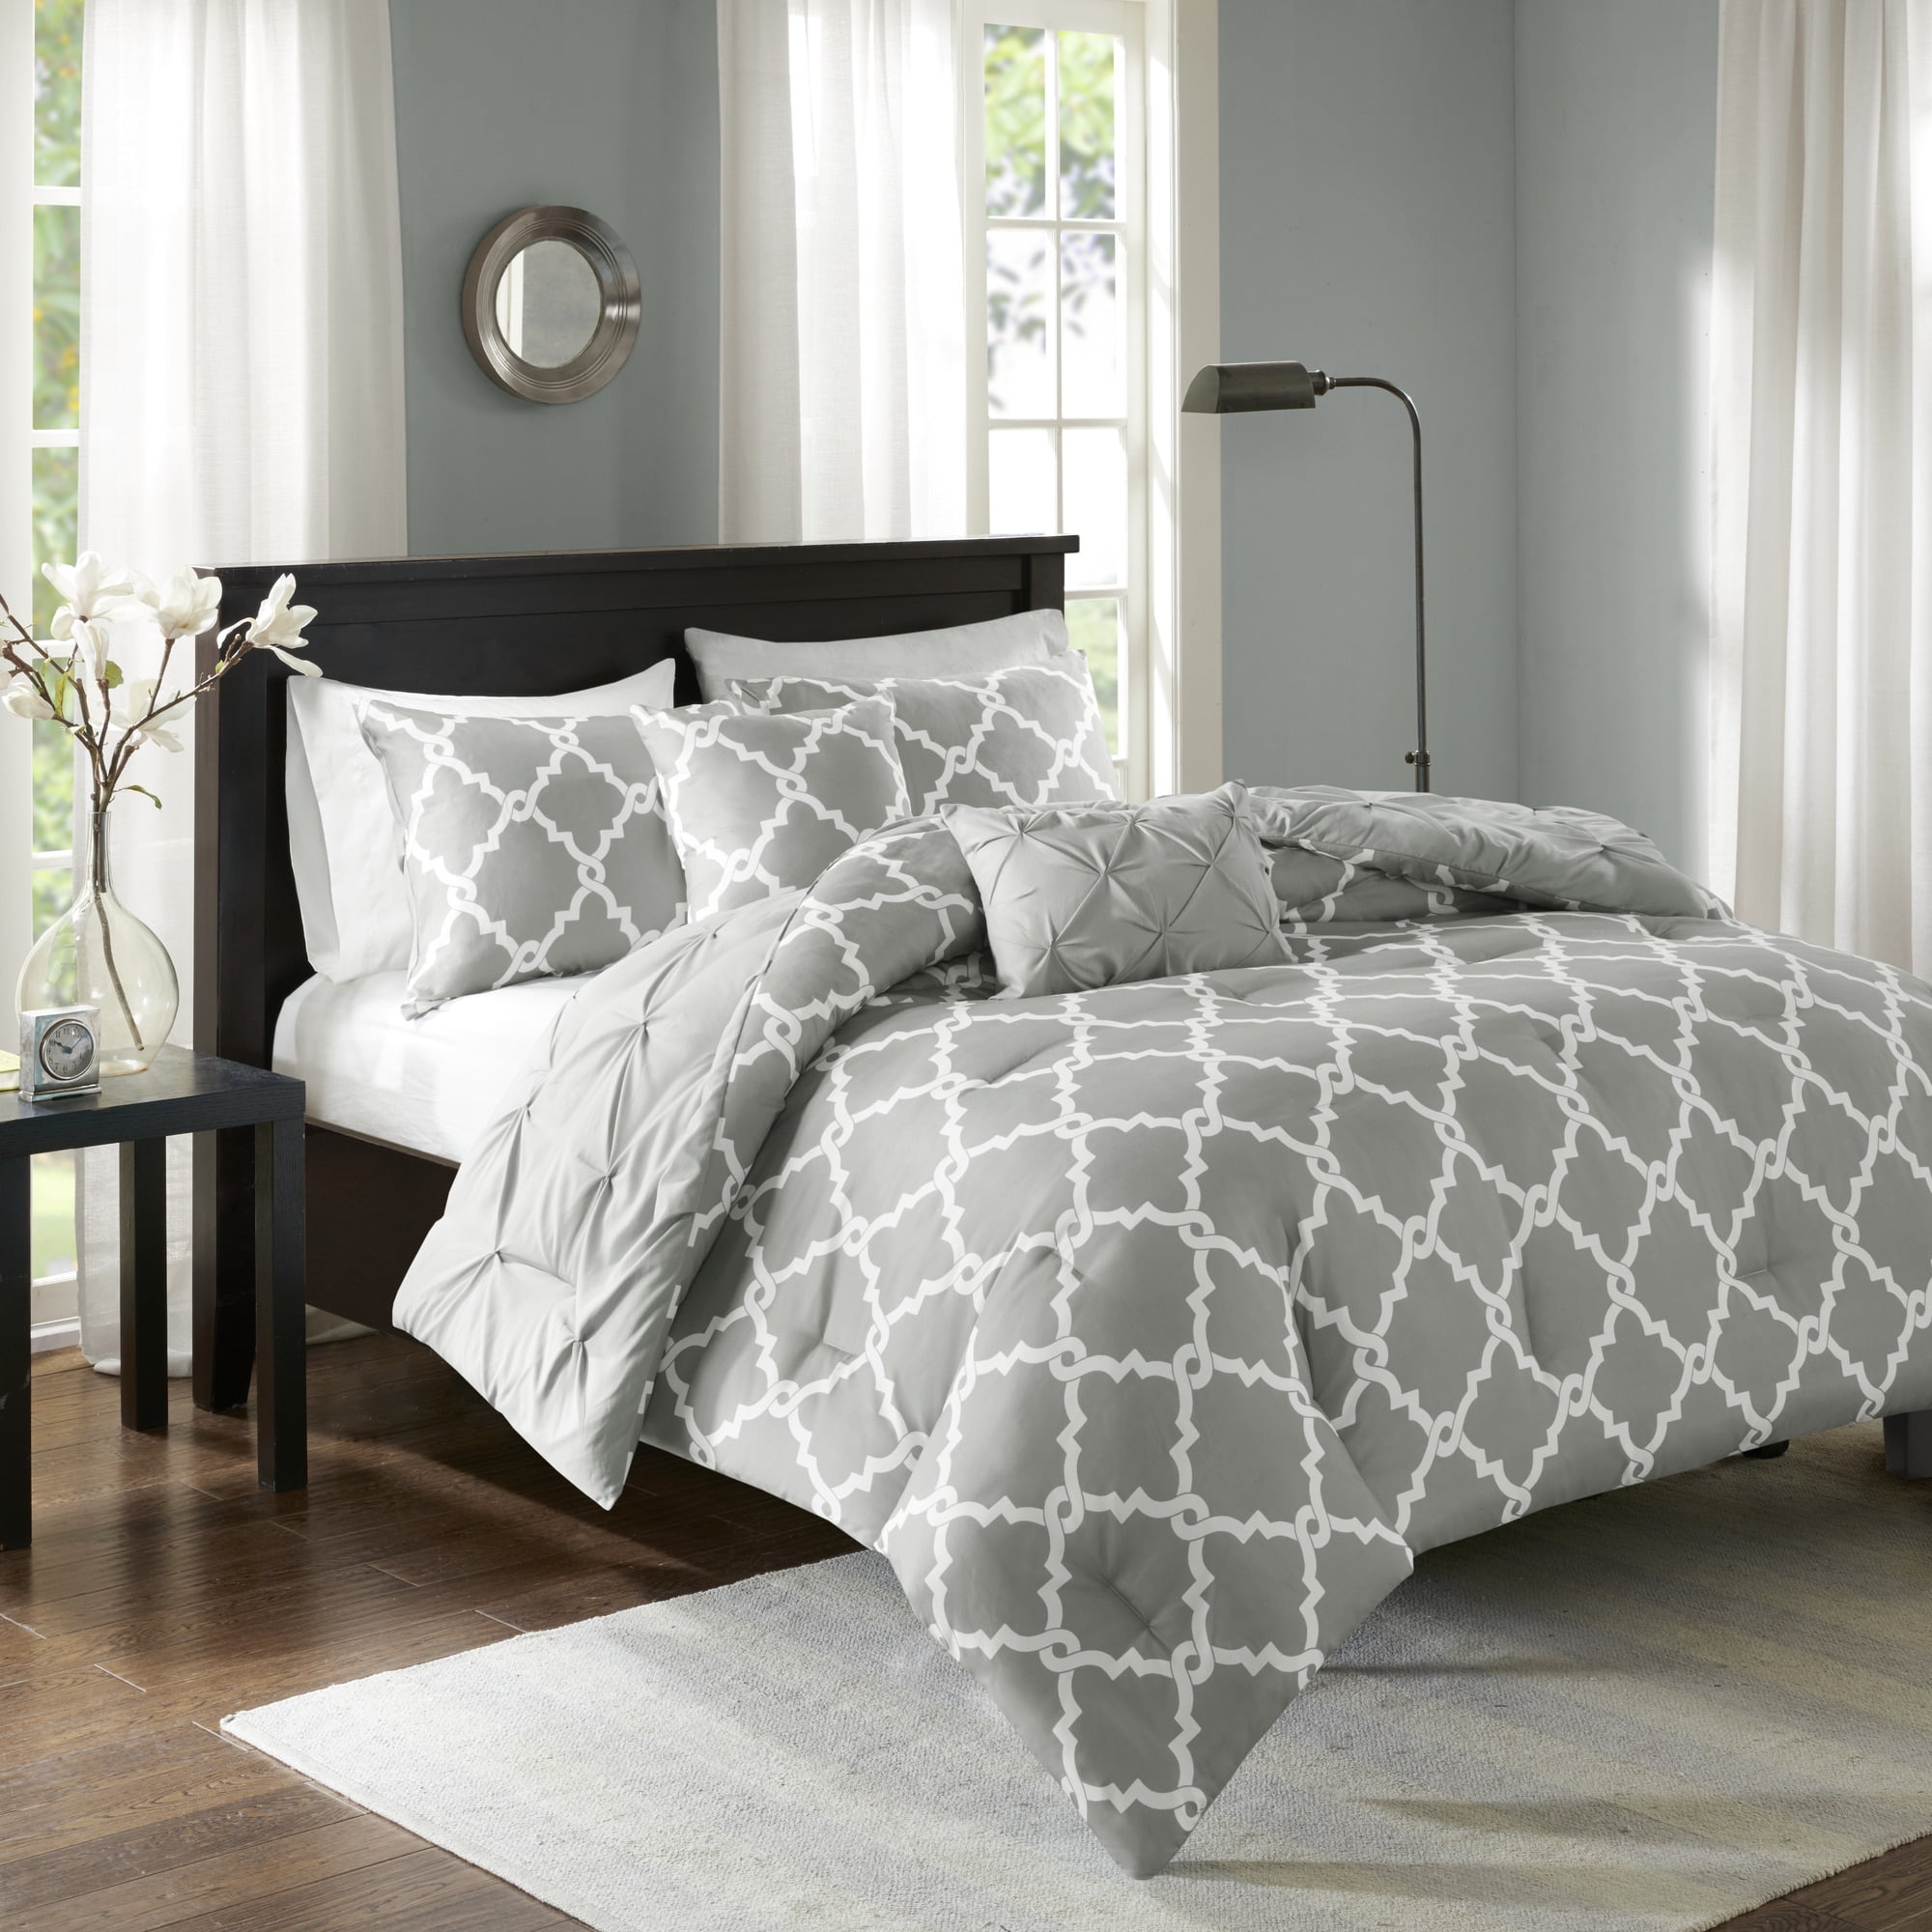 Beautiful Gery  Taupe Fretwork Embroidered 7 pcs Comforter Cal King Queen set 